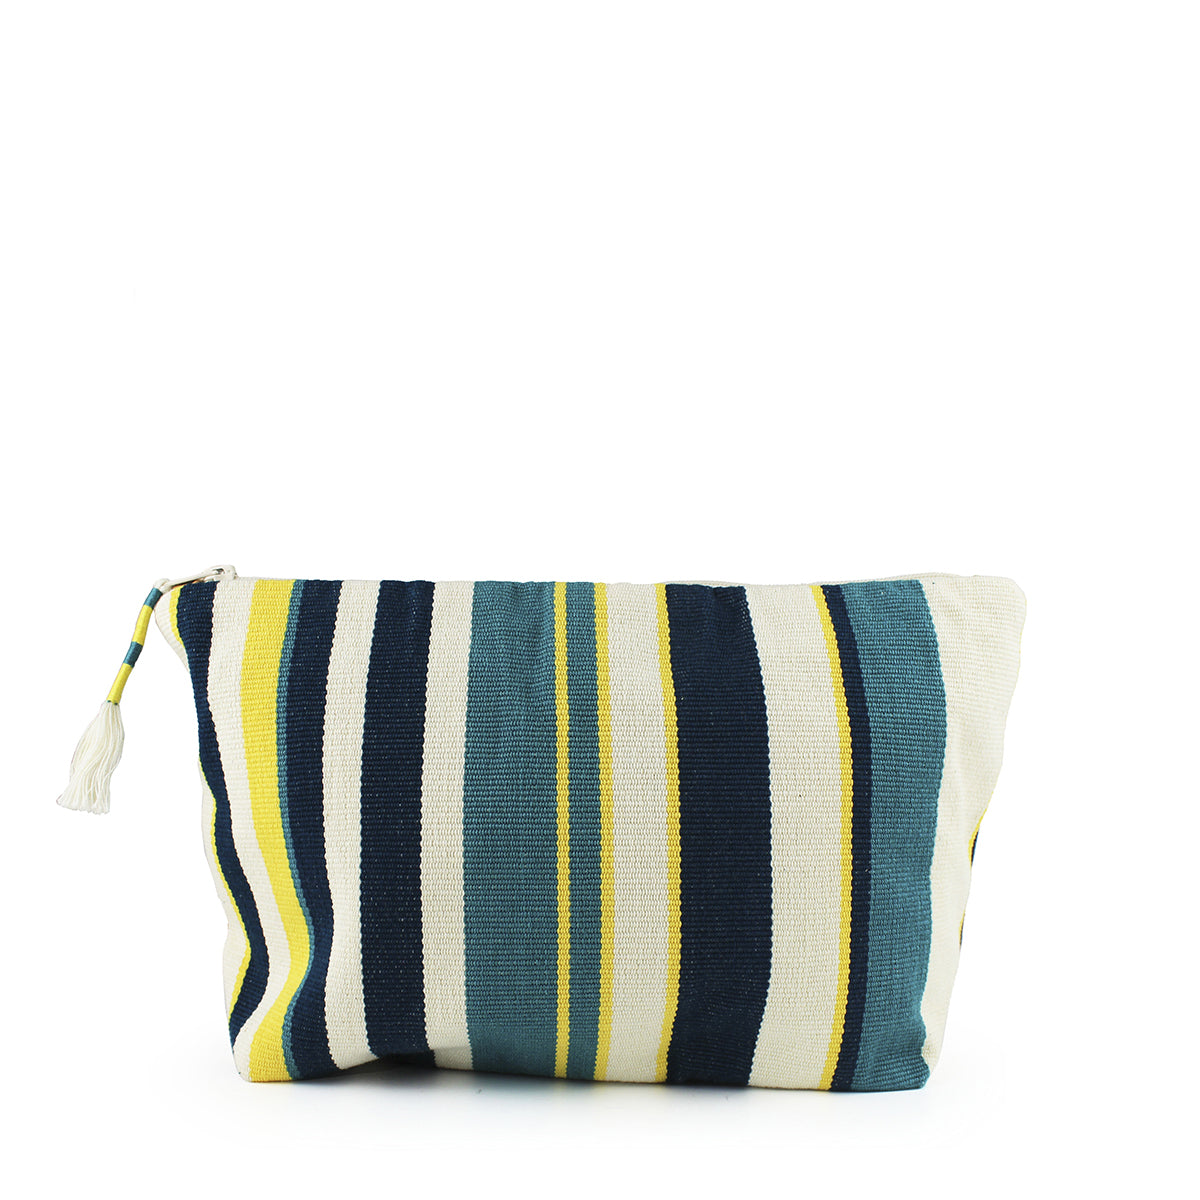 Front of the hand woven artisan Cristina Cosmetic Pouch in Denim Pacific.  The front pattern has vertical dark blue, turquoise, lemon yellow, and beige stripes. It has a tassel with wrap around yellow and turquoise thread.